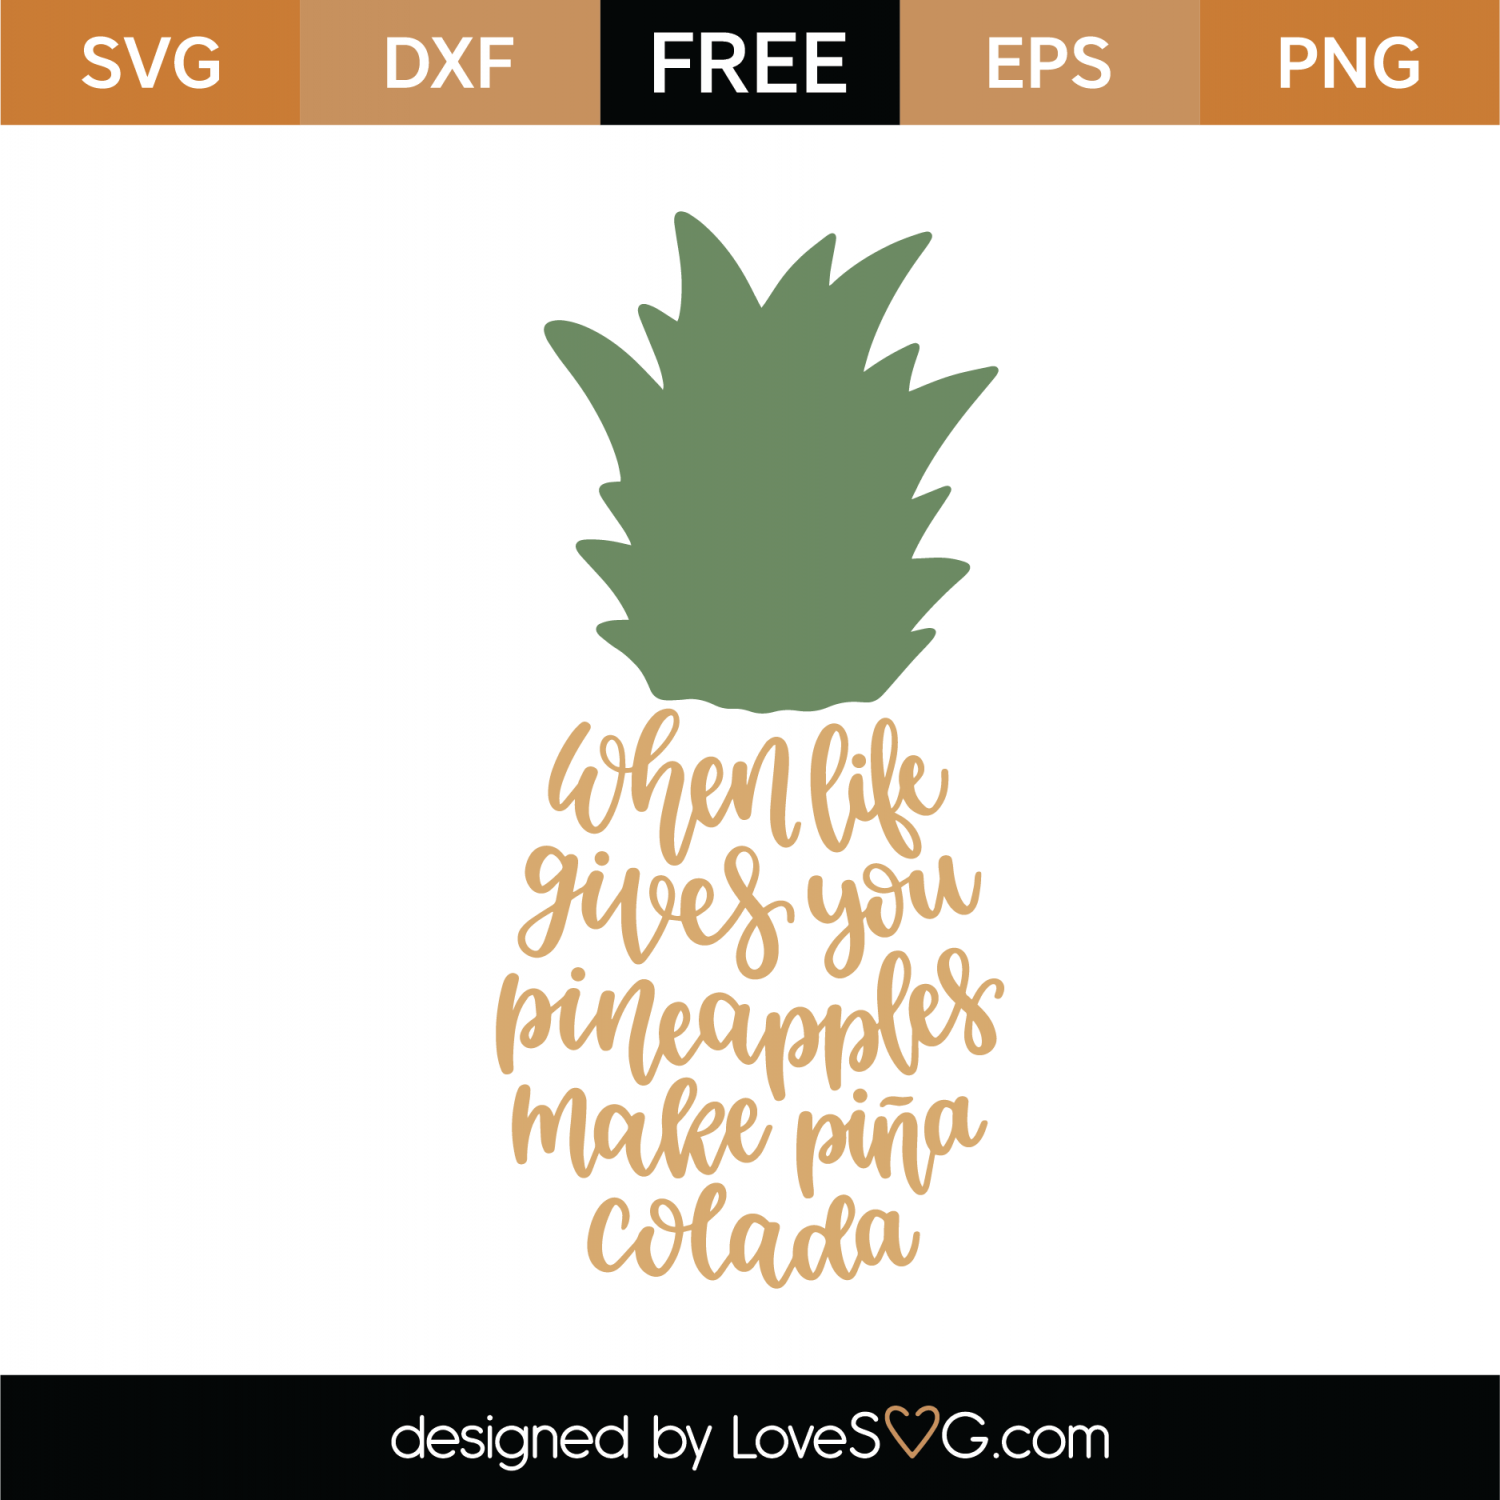 Download Free When Life Gives You Pineapples SVG Cut File | Lovesvg.com